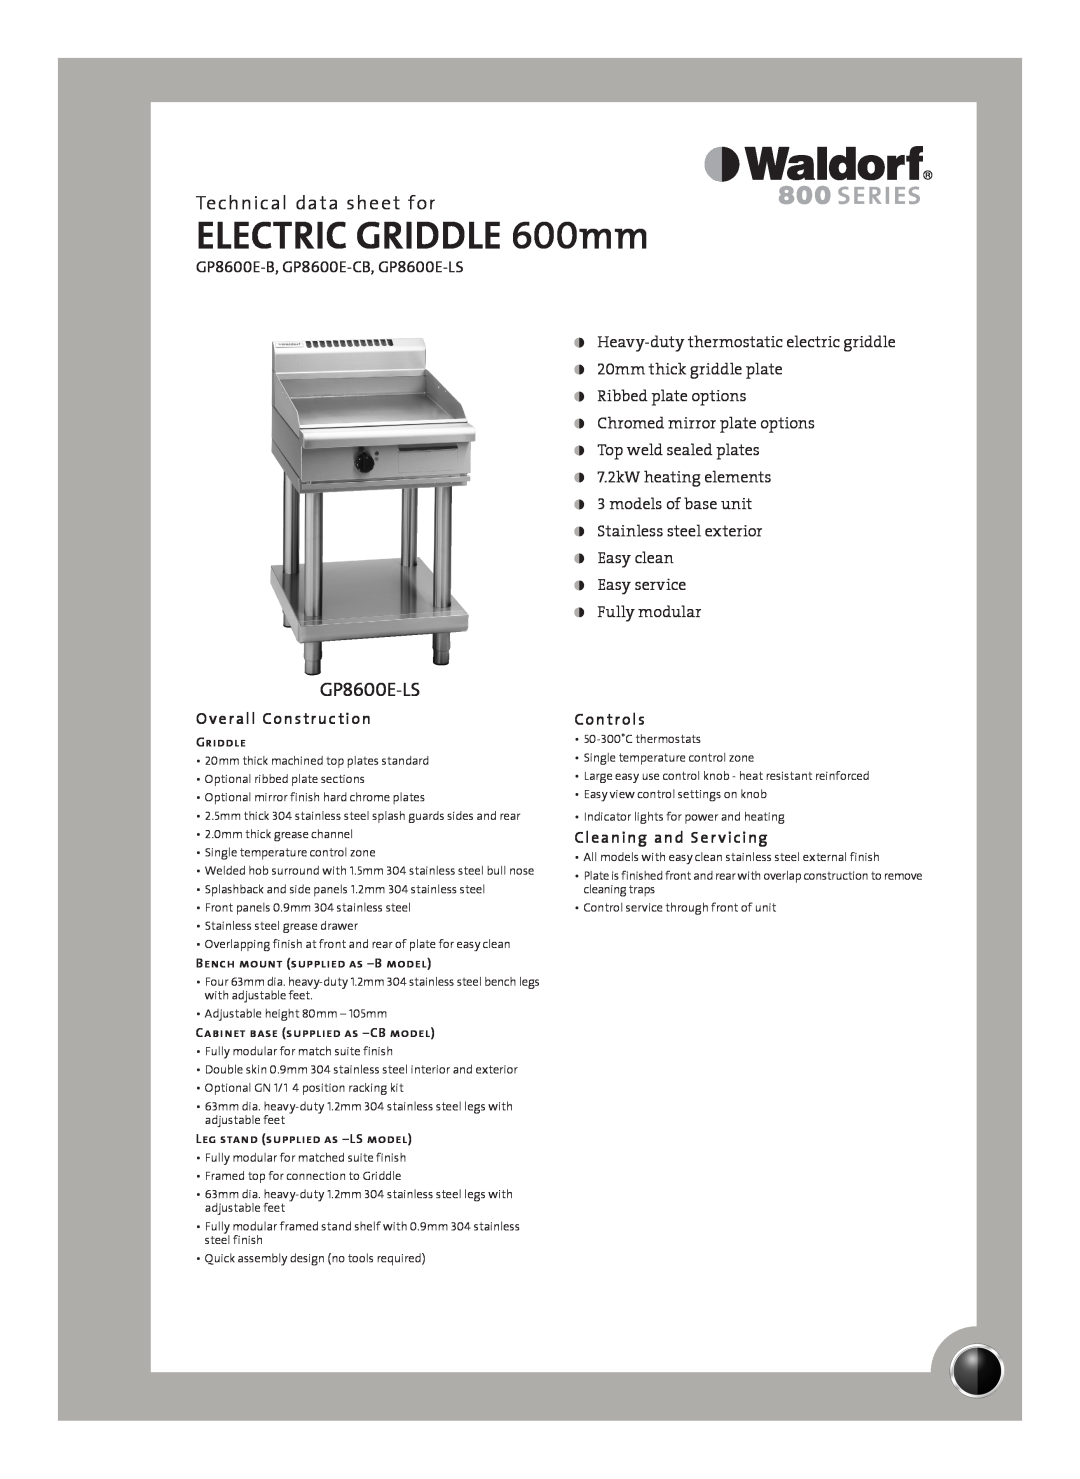 Moffat GP8600E-B manual Technical data sheet for, GP8600E-LS, Overall Construction, Controls, Cleaning and Ser vicing 